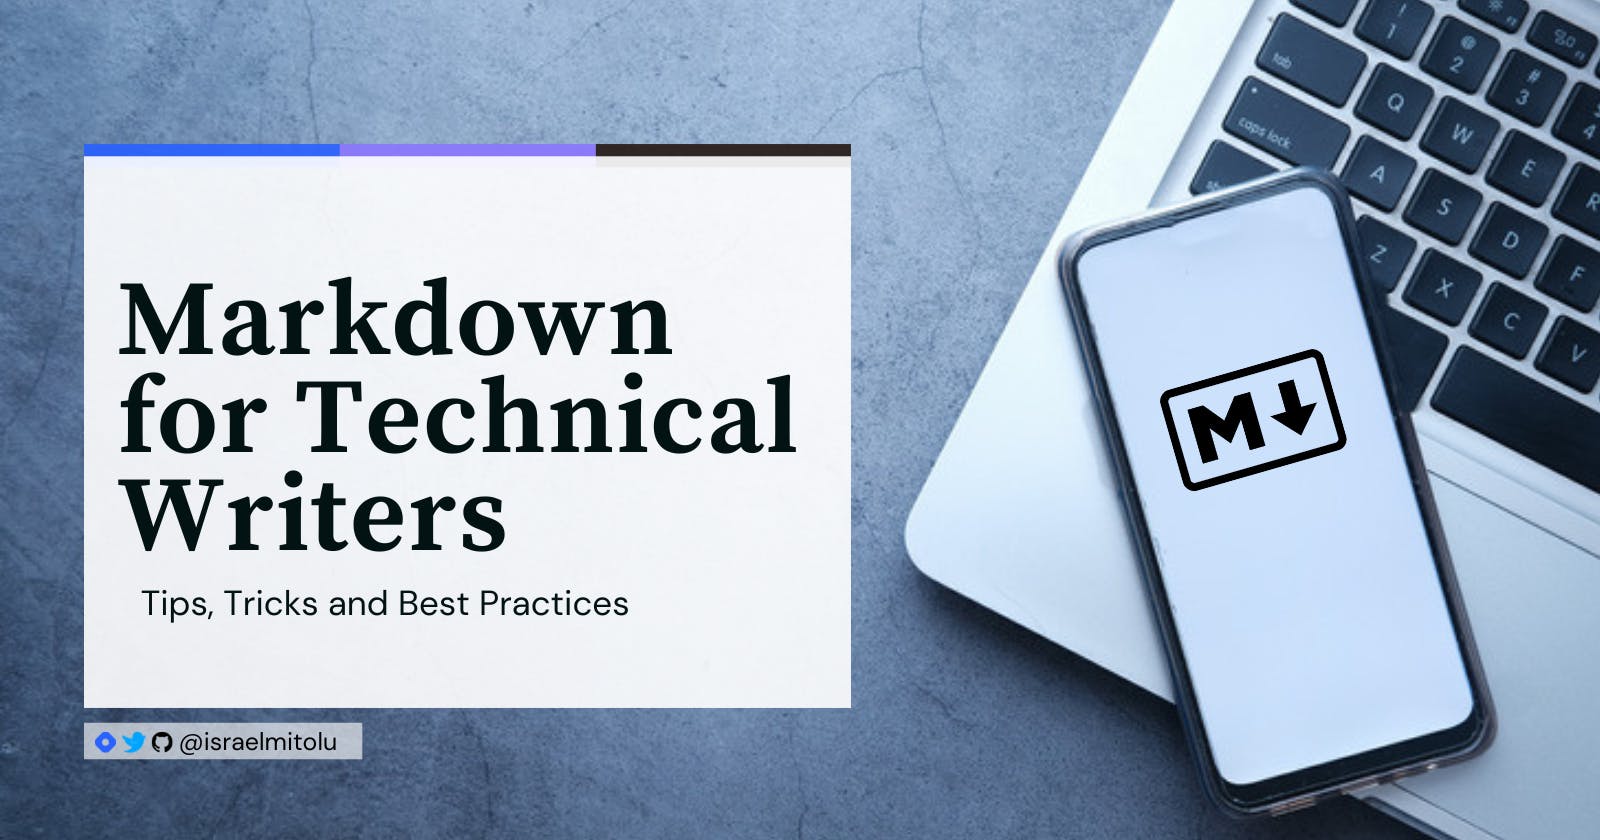 Markdown for Technical Writers: Tips, Tricks, and Best Practices